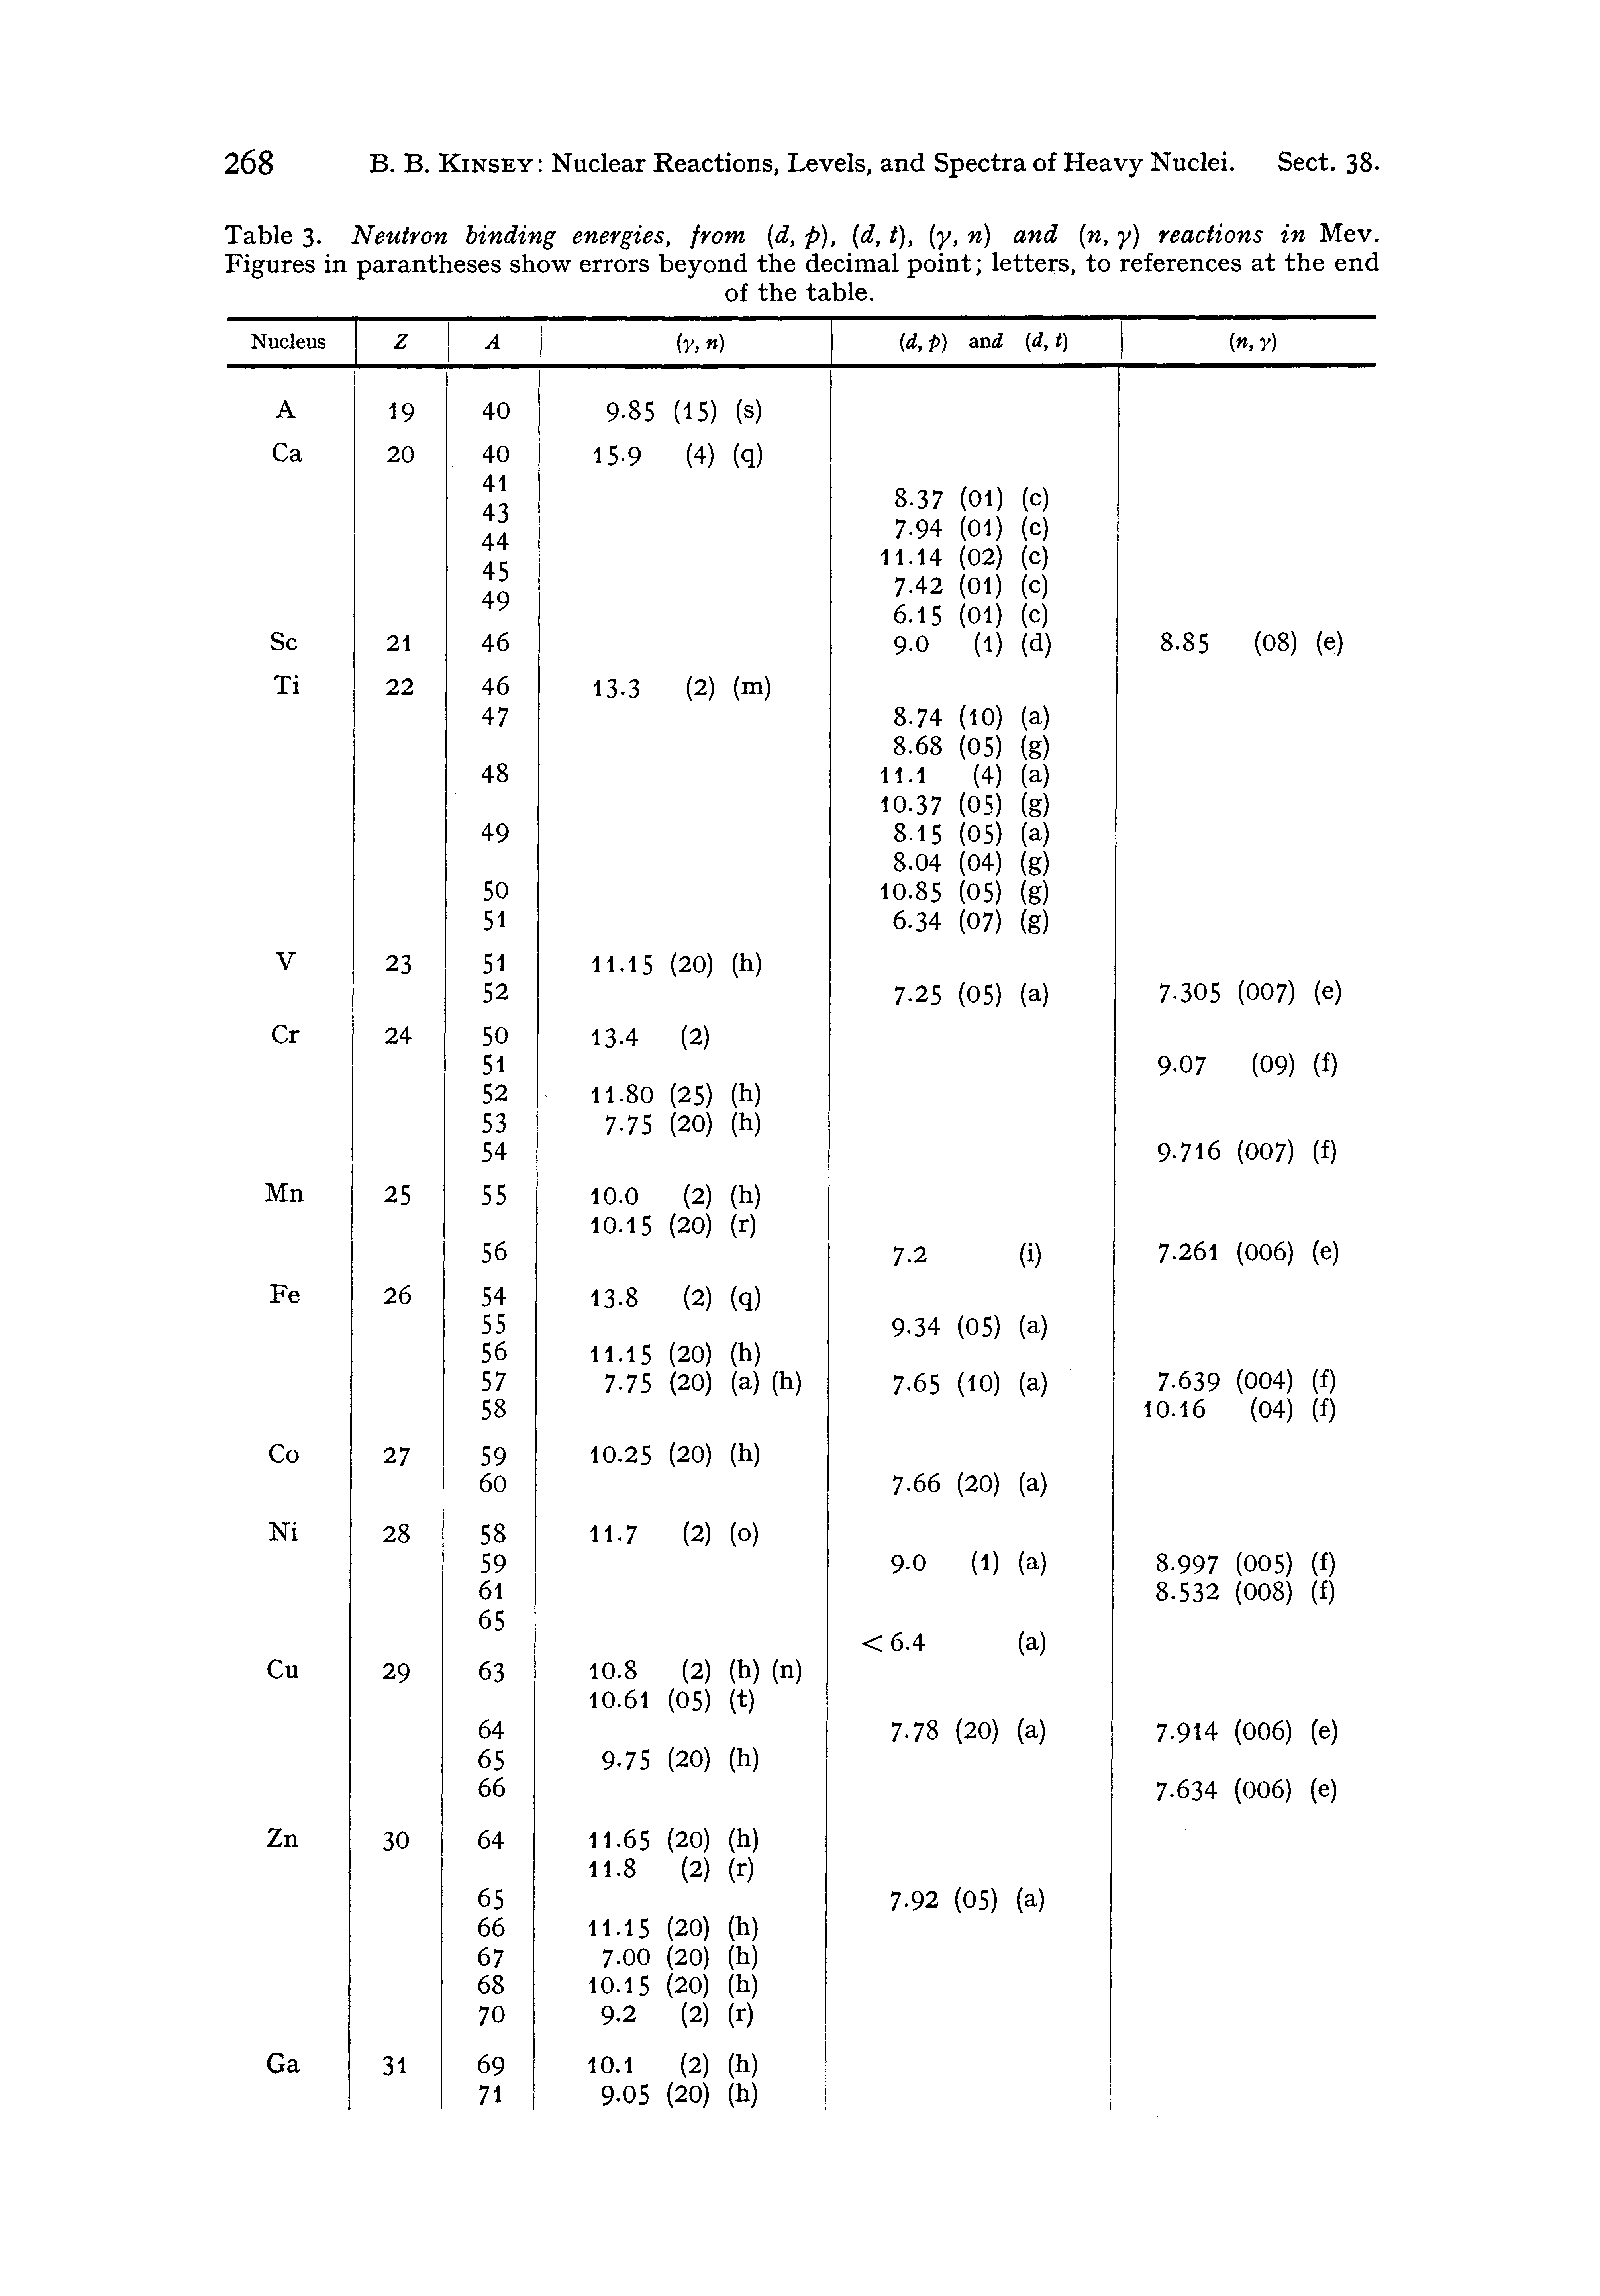 Table 3- Neutron binding energies, from [d, p), [d, t), (y, n) and n, y) reactions in Mev. Figures in parantheses show errors beyond the decimal point letters, to references at the end...